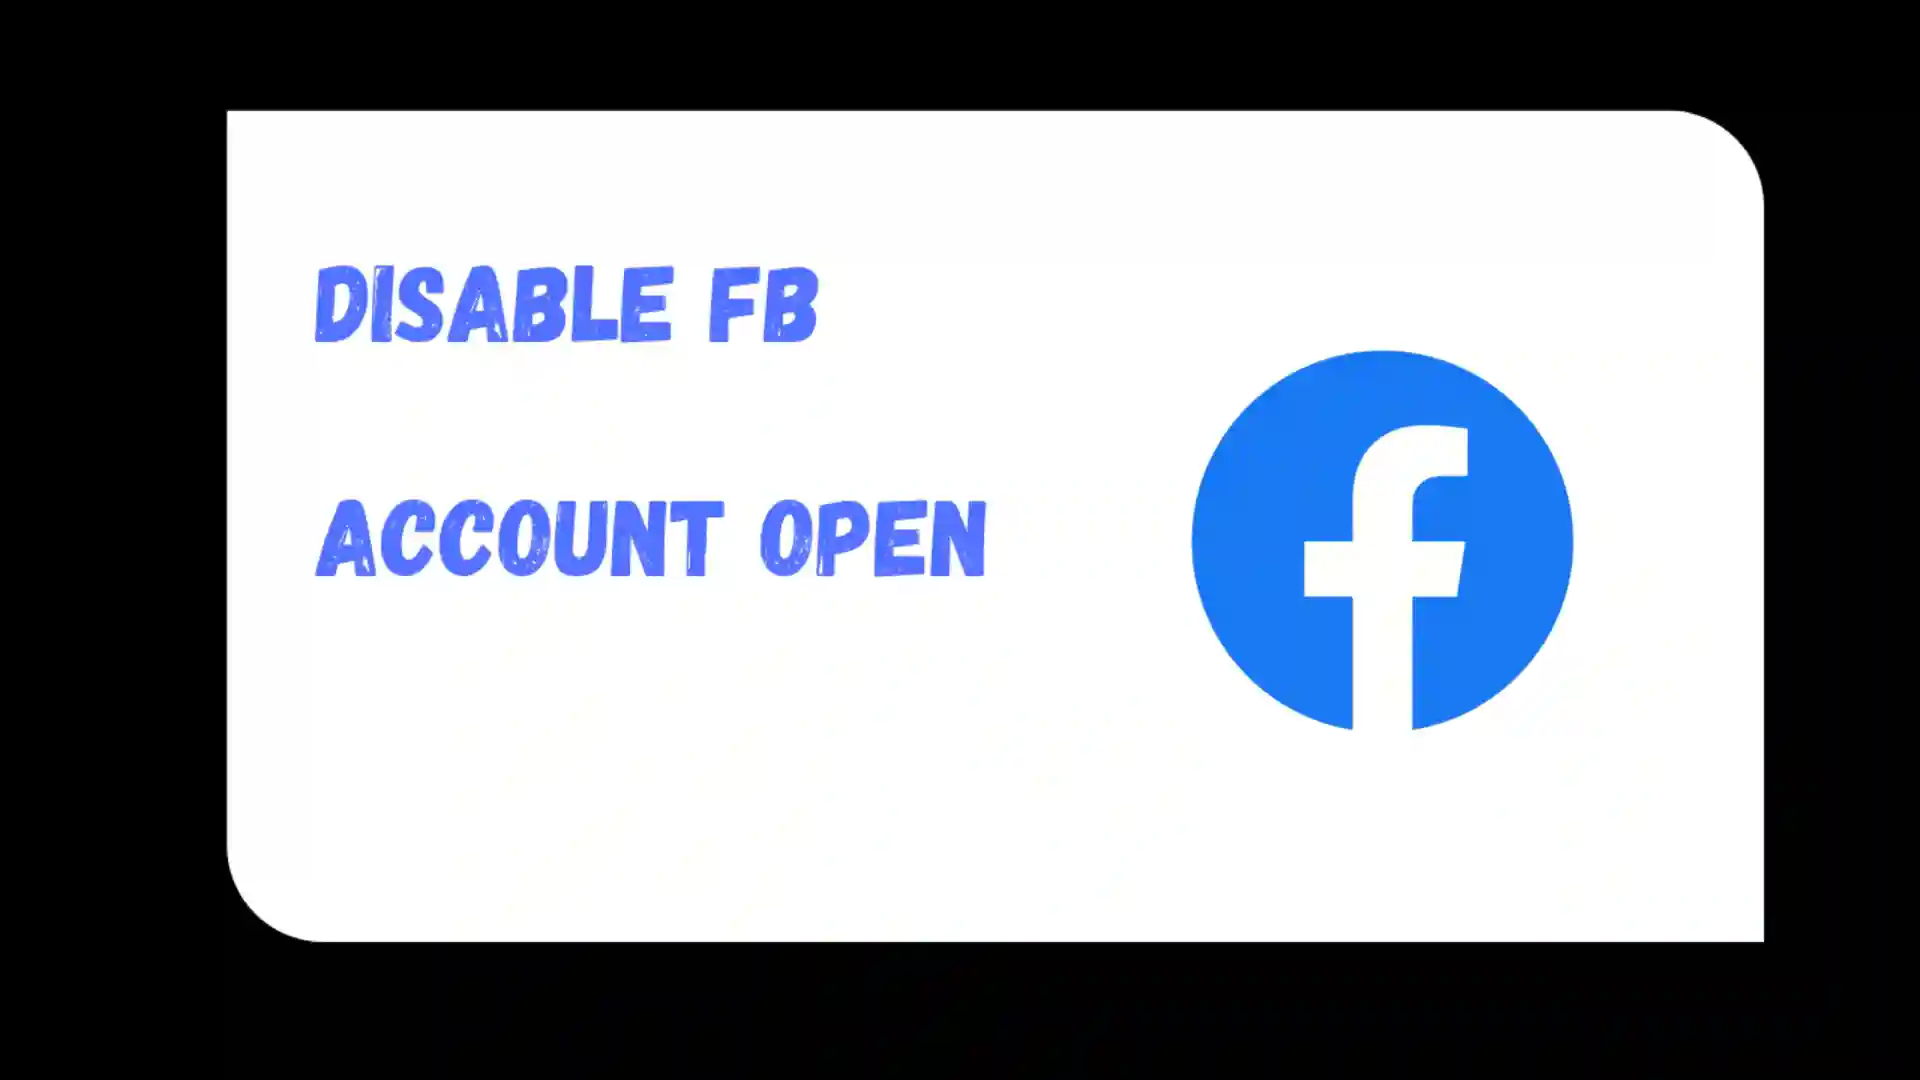 Disable-fb-account-open-kaise-kare